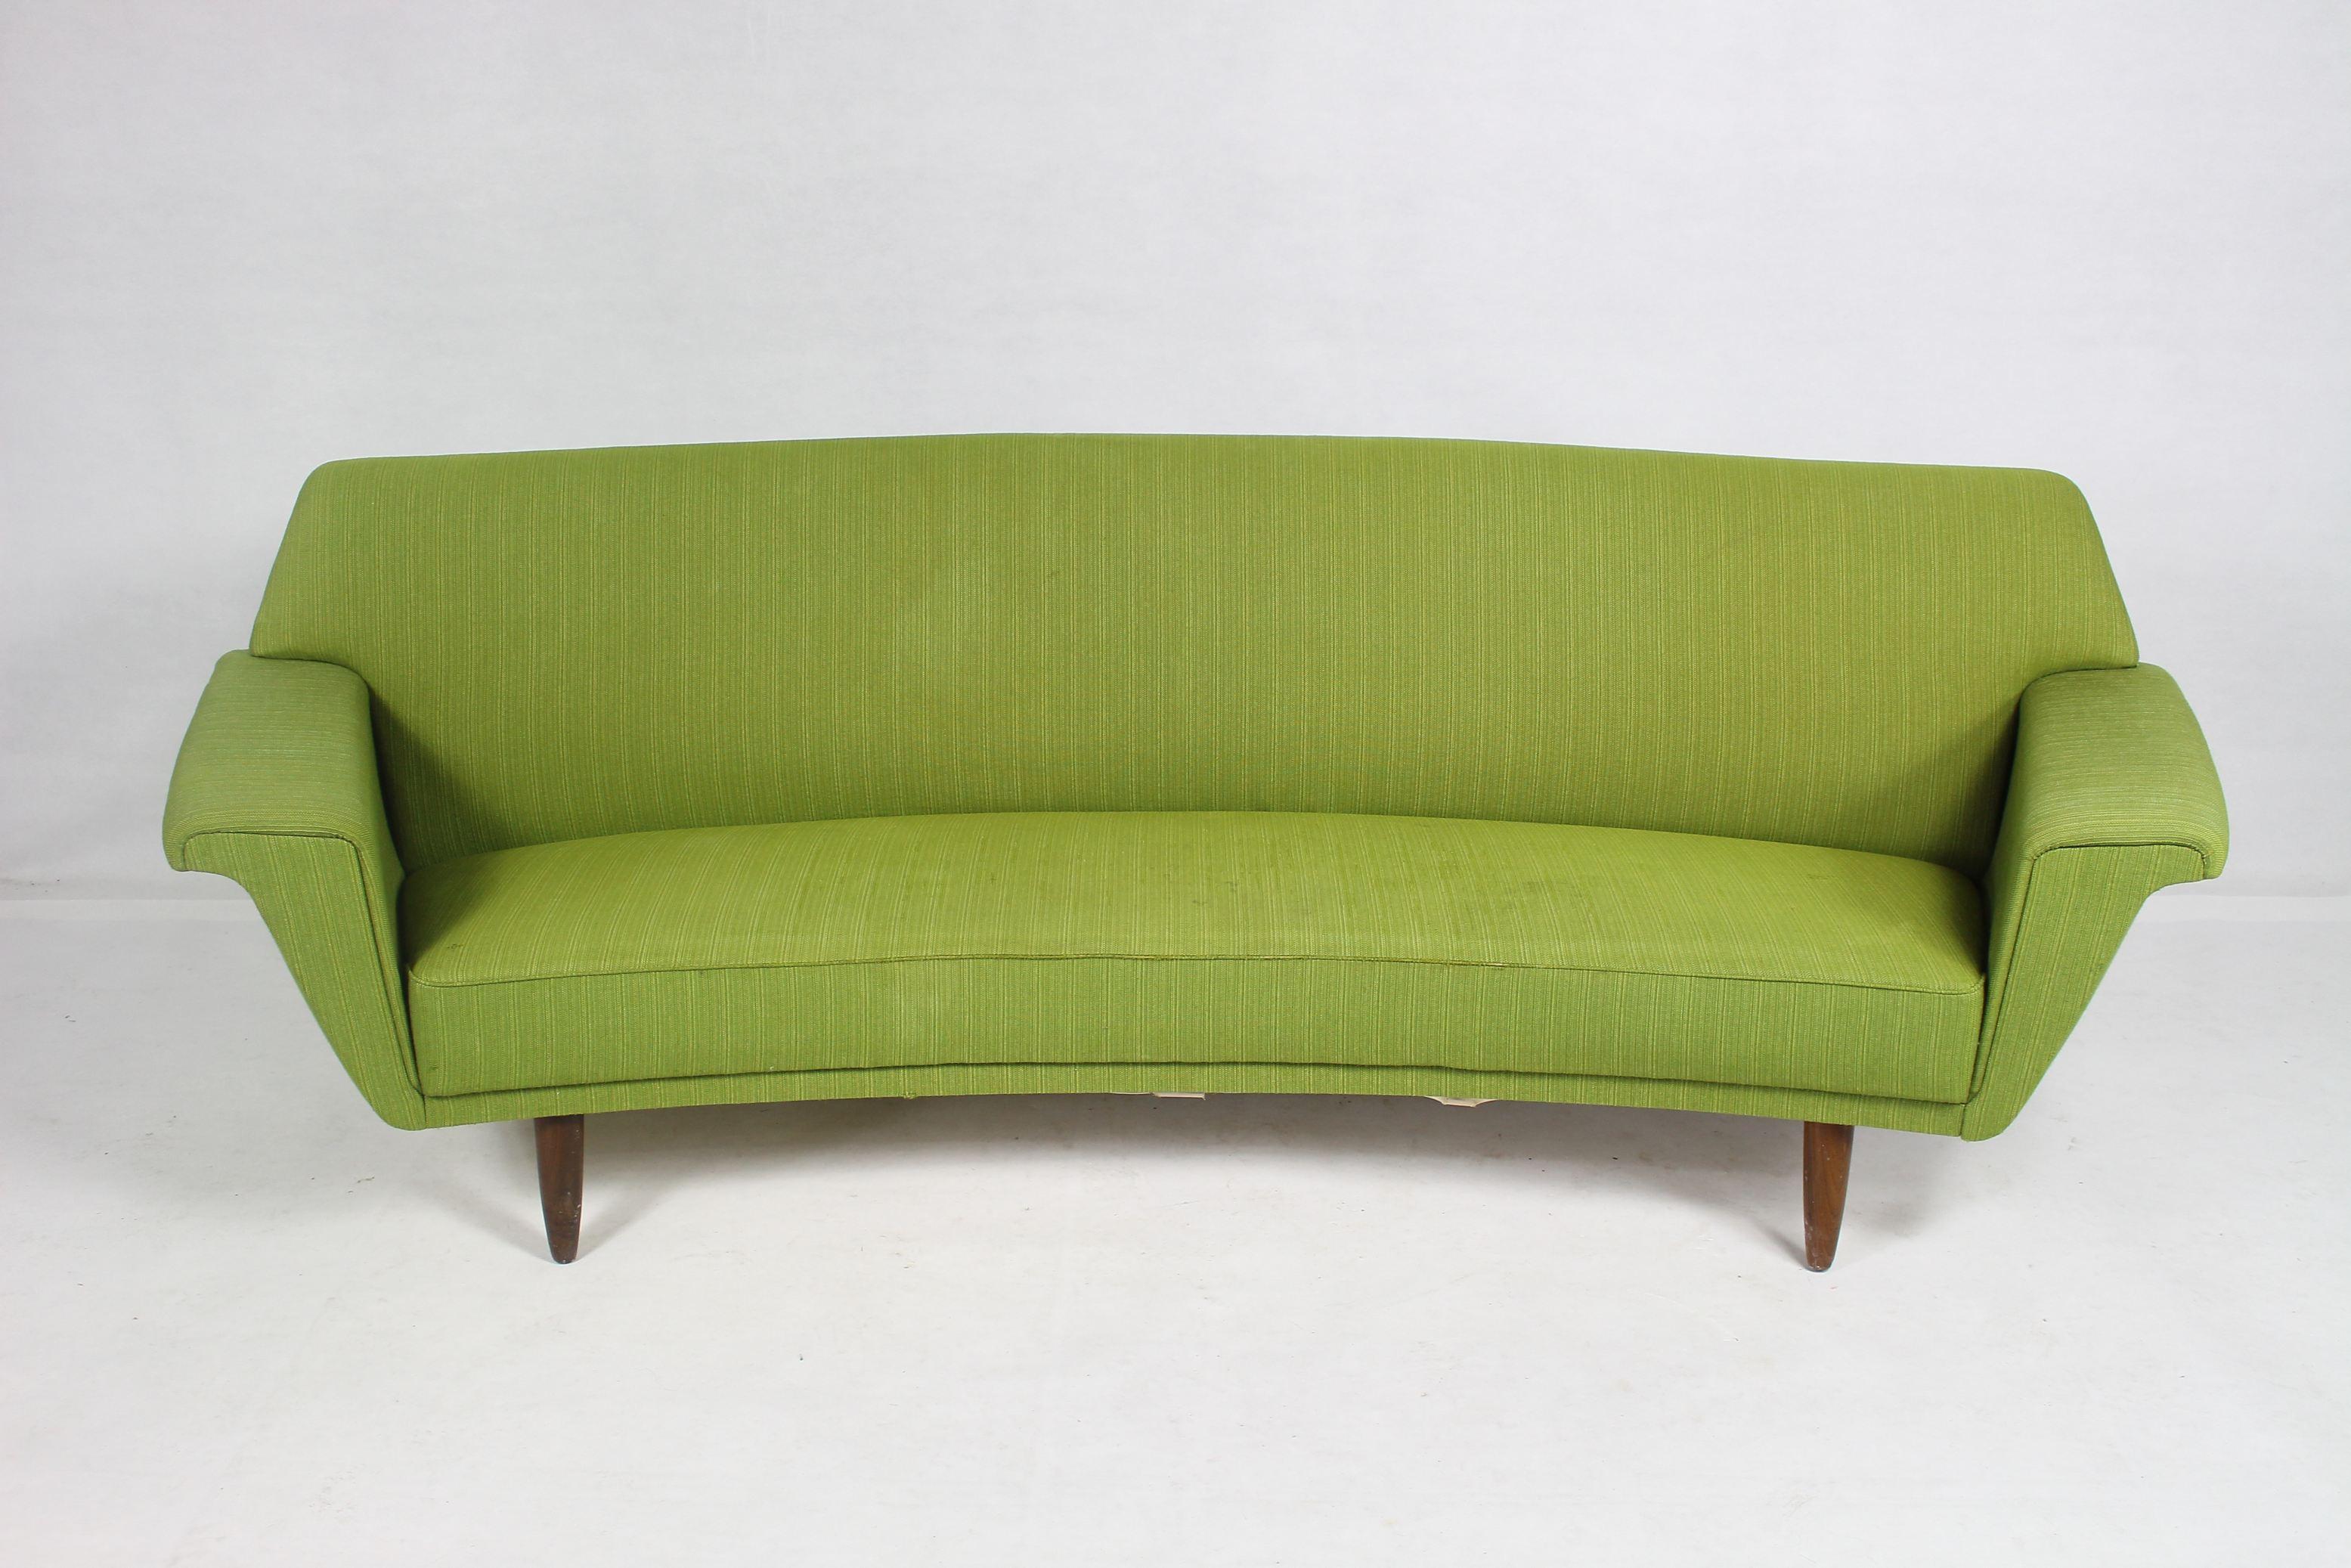 This model 53 banana sofa was designed by Georg Thams.
It is in original condition and features wooden legs.
It is recommended to replace the upholstery.